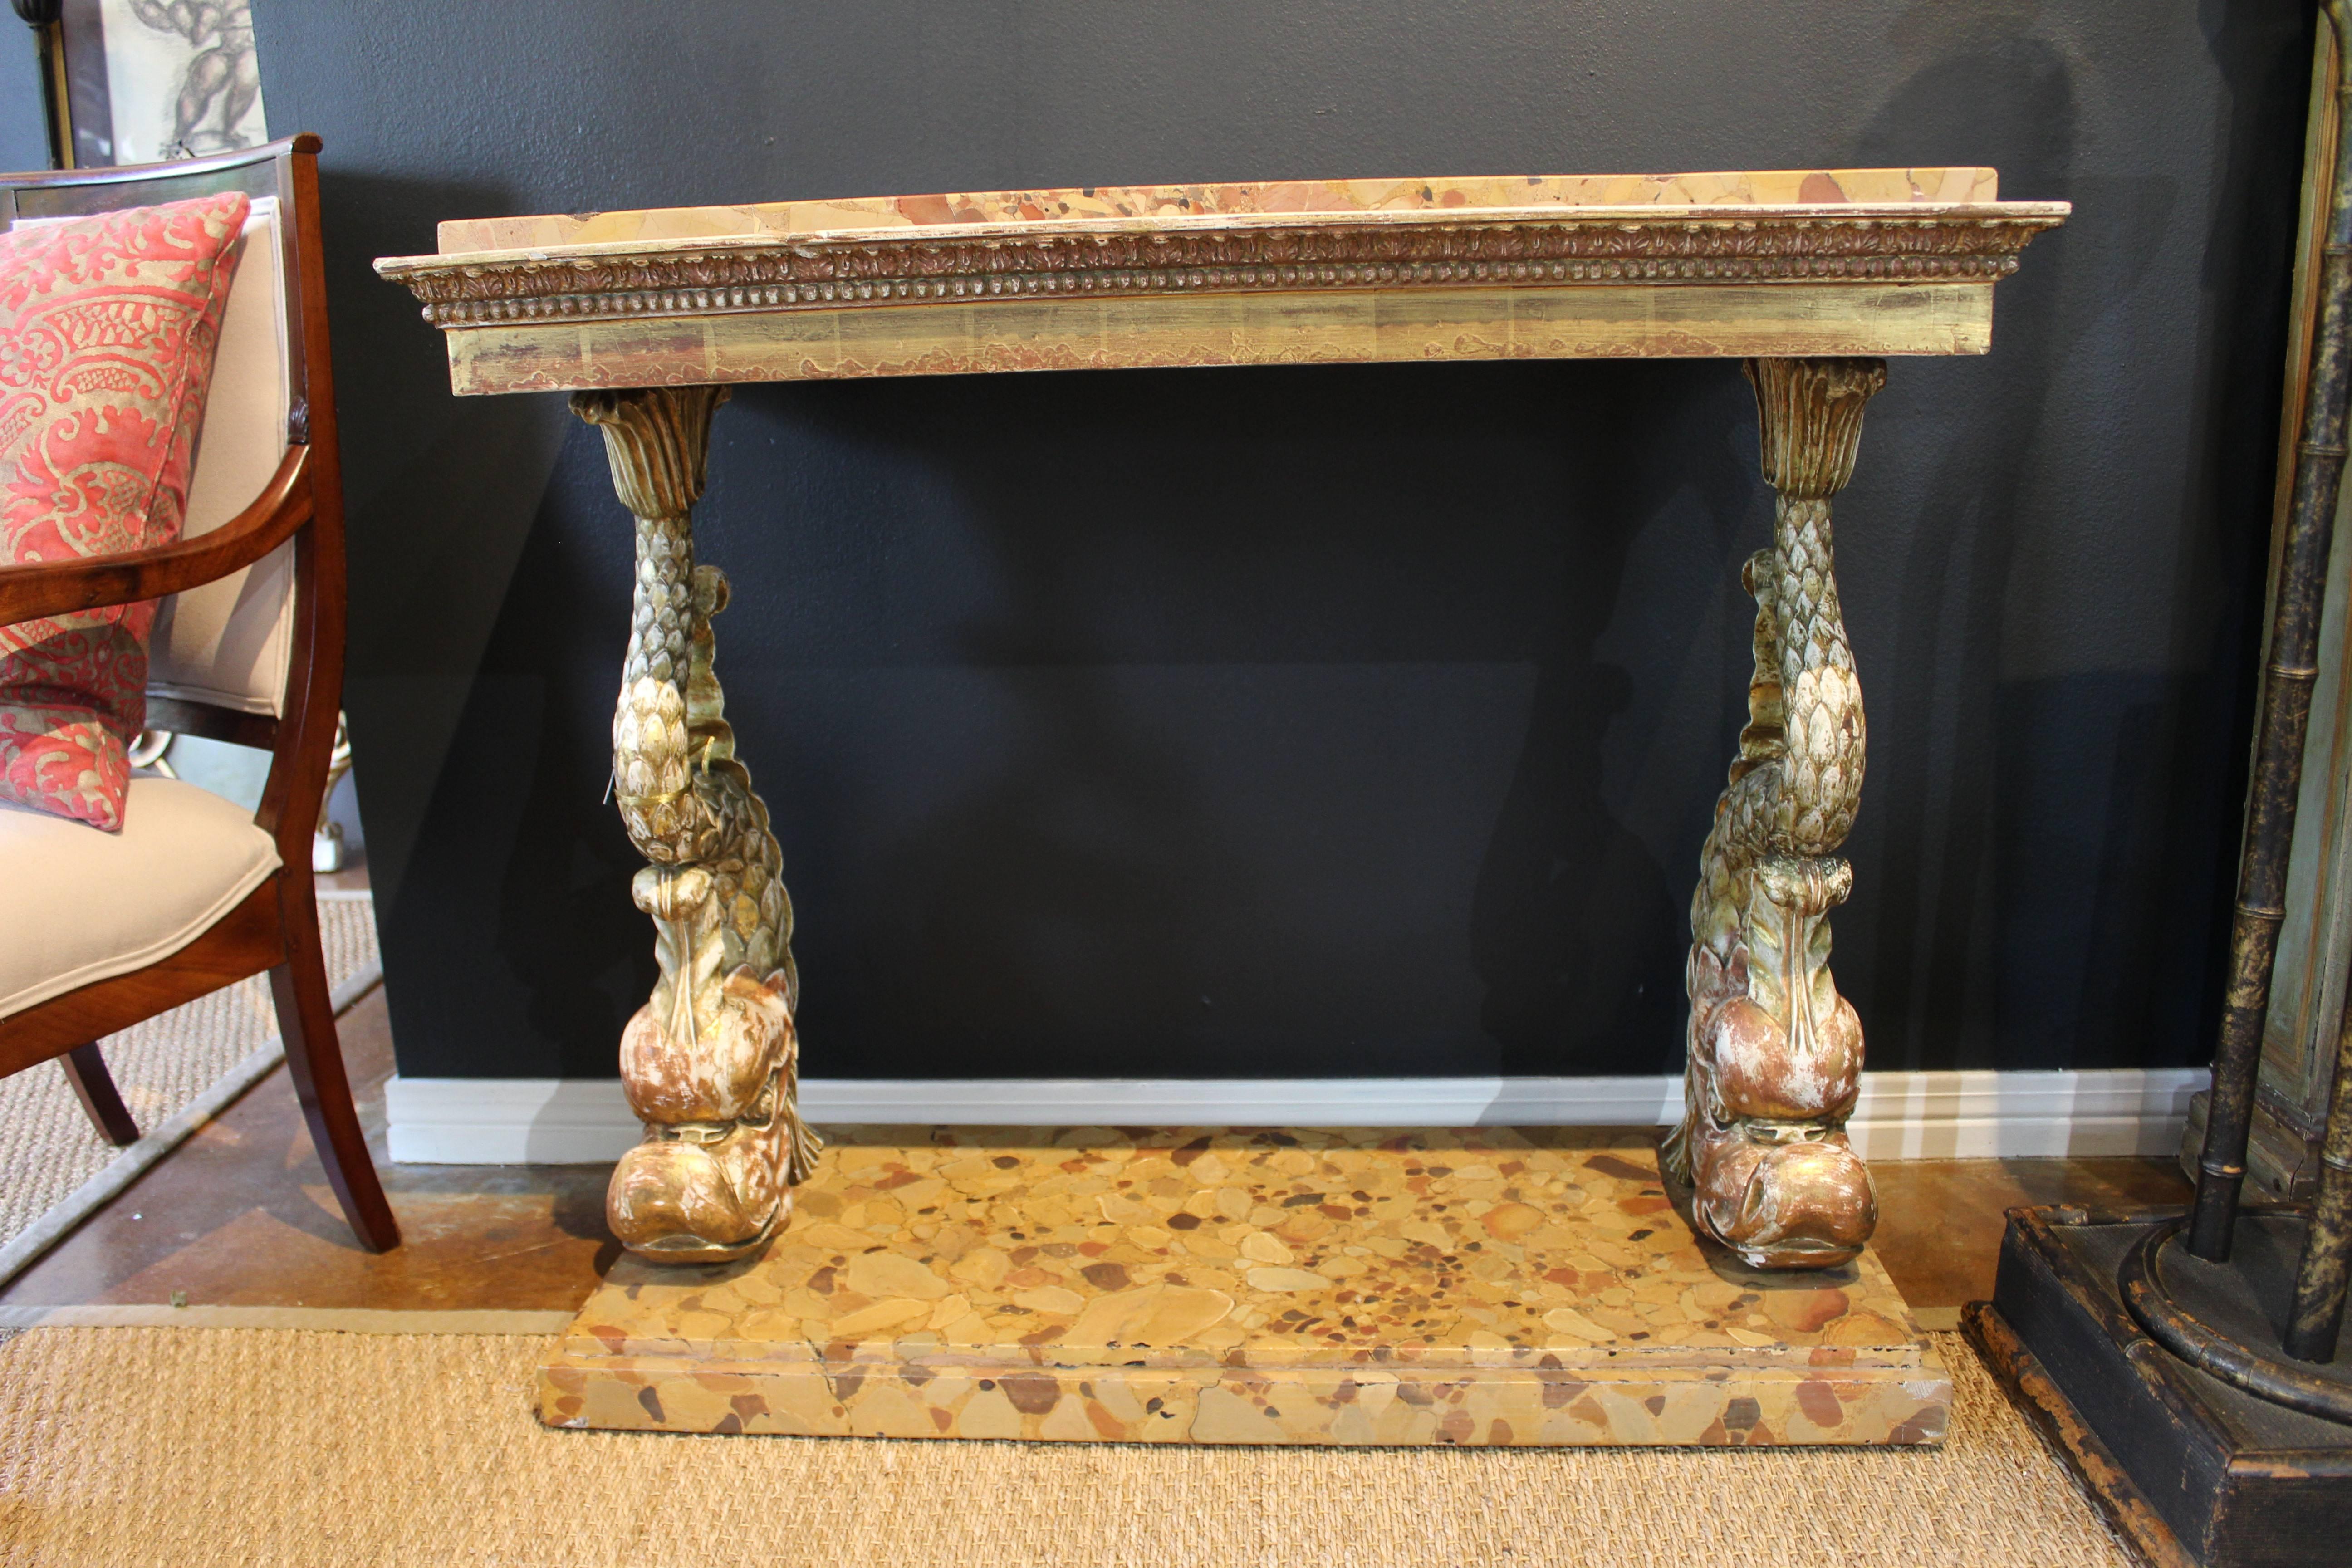 Pair of gorgeous consoles with giltwood structure and solid peach and ochre hued stone tops and bases. Carved Regency Italianate dolphins support each console. Designed to be used against a wall, not freestanding.